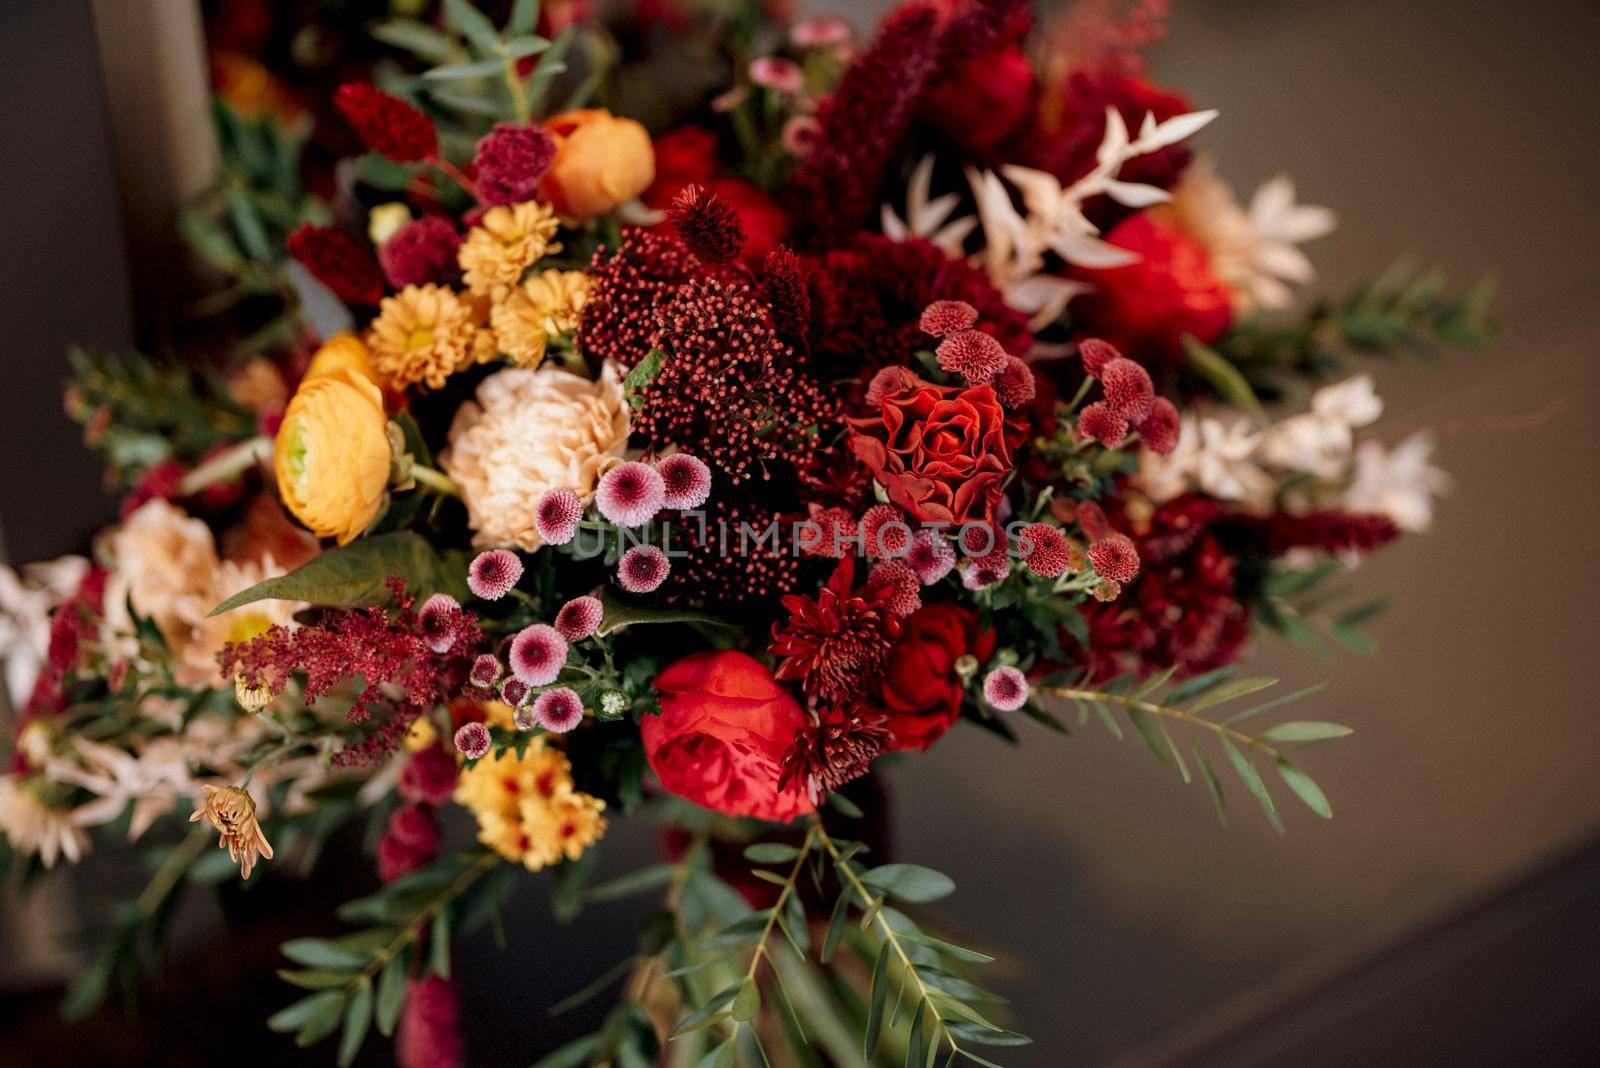 red elegant wedding bouquet of fresh natural flowers by Andreua